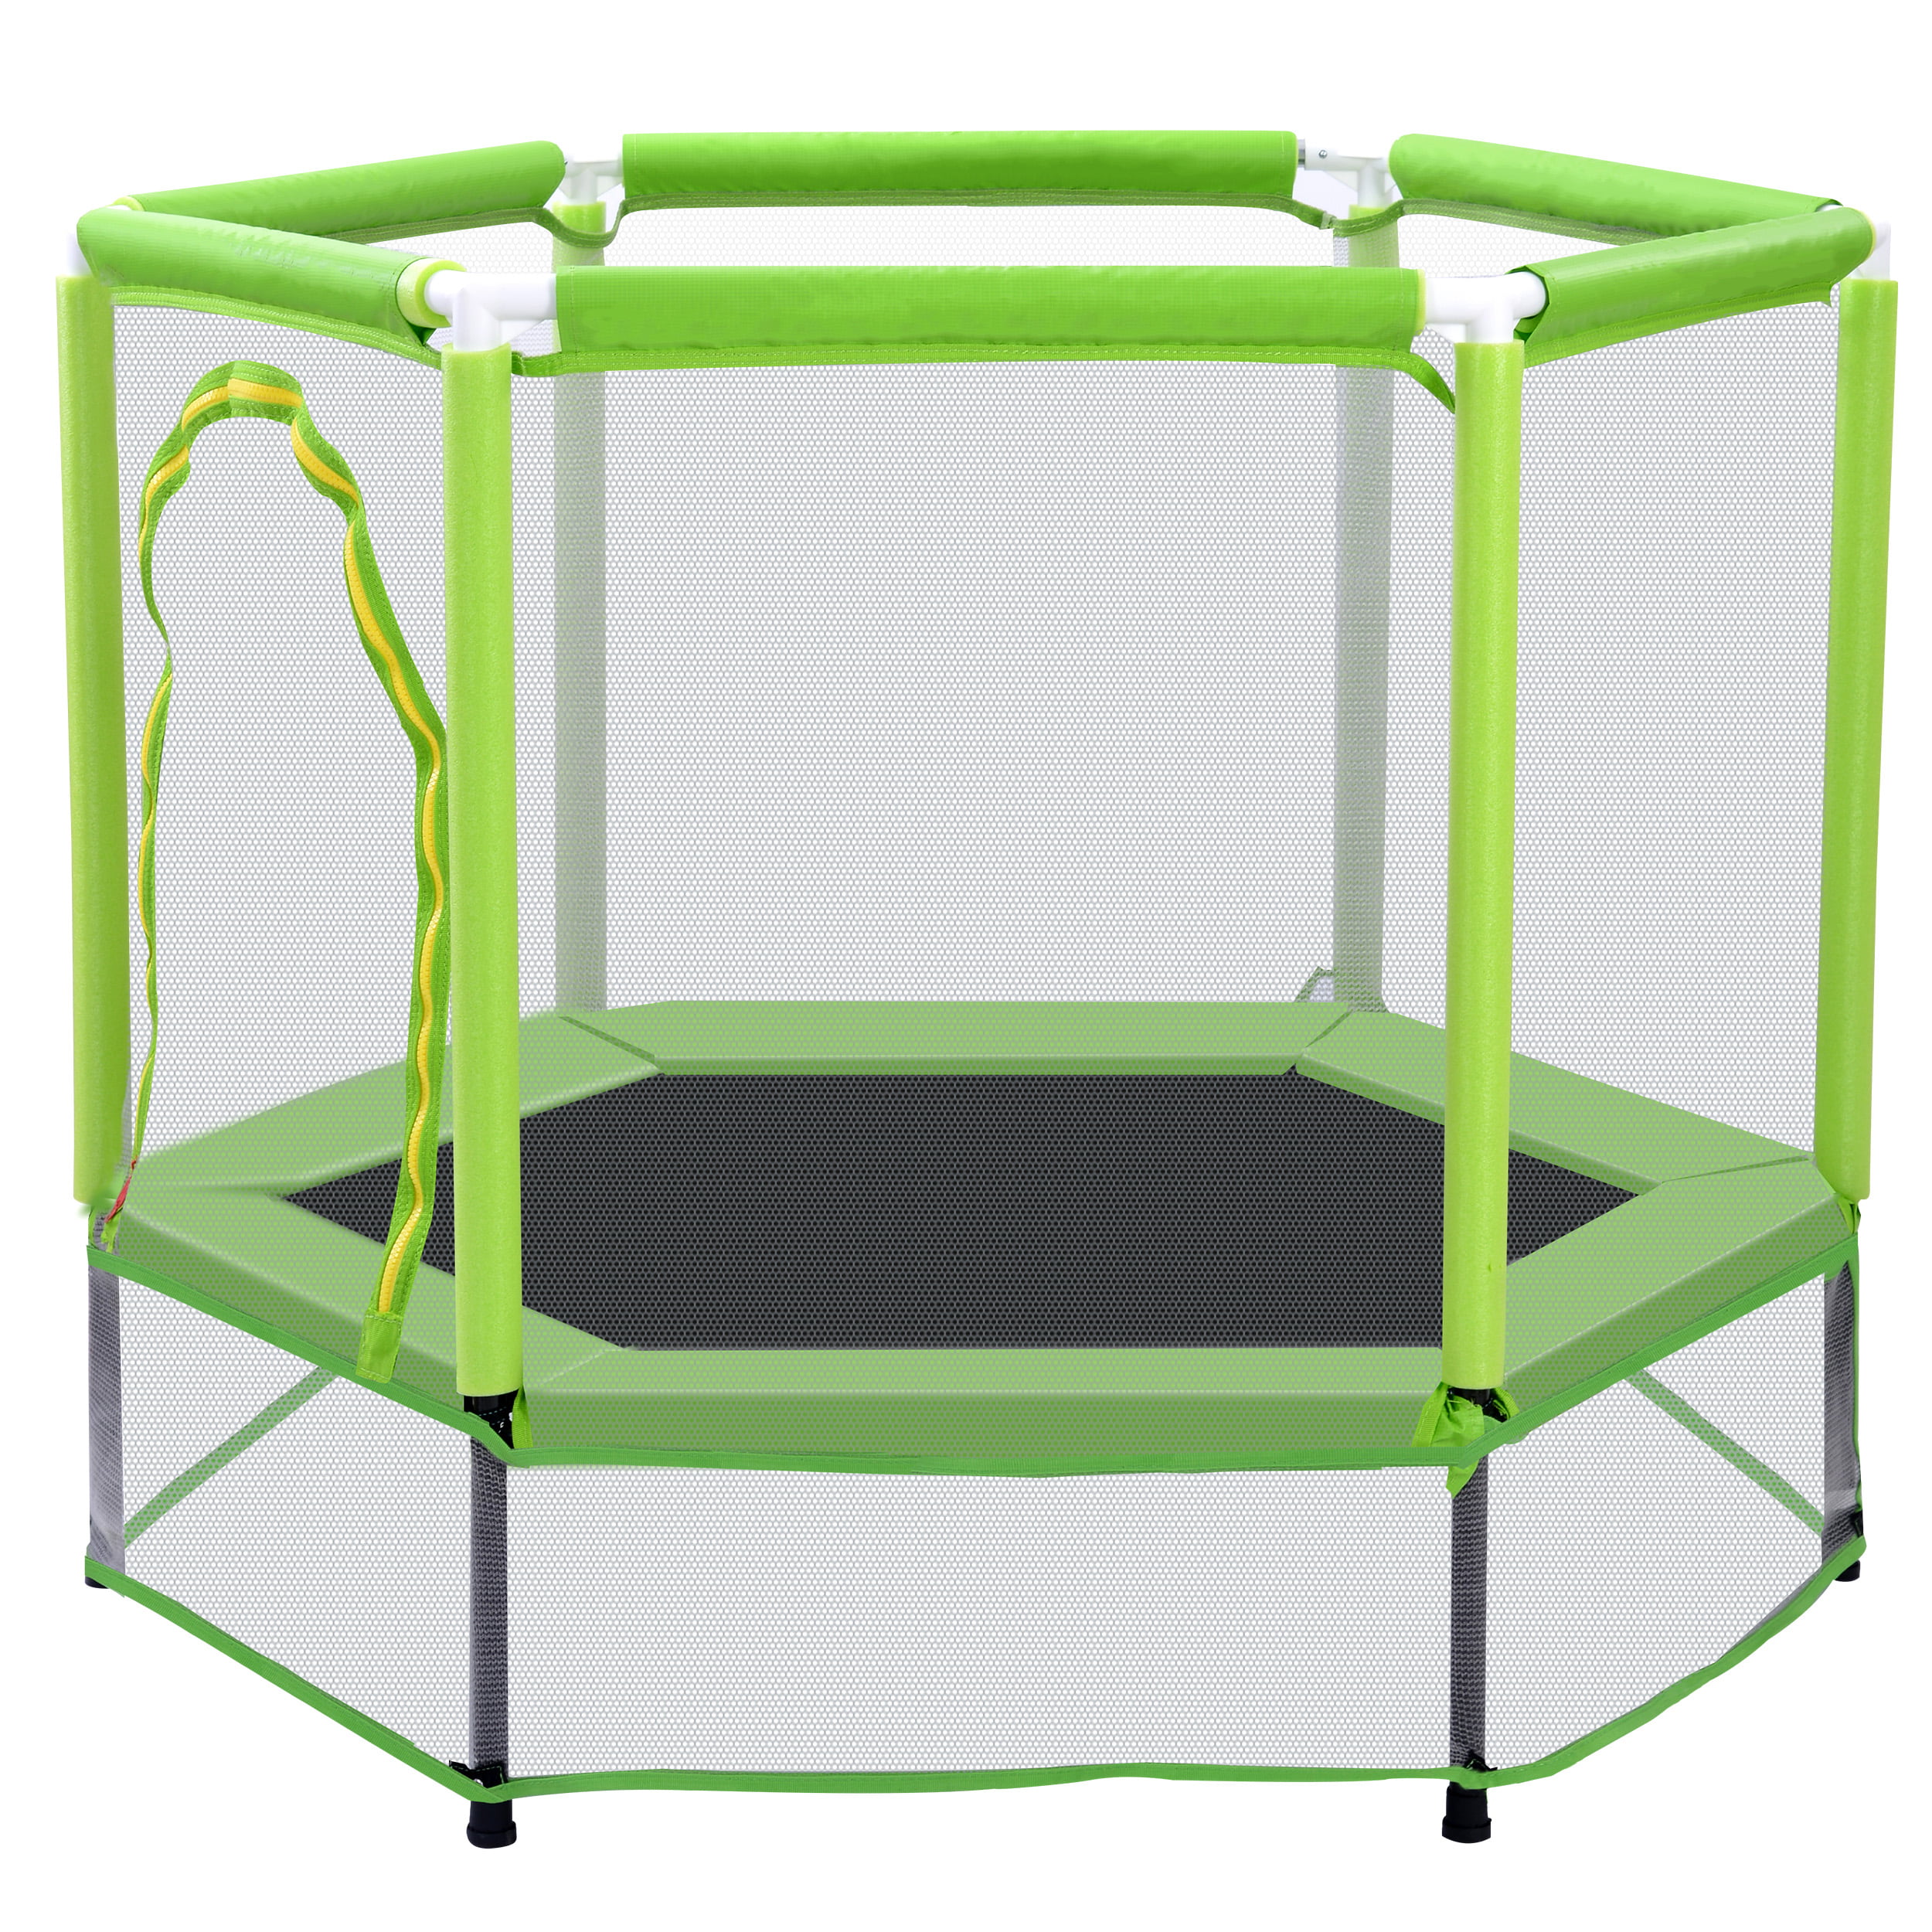 Suzicca 55” Toddlers Trampoline with Safety Enclosure Net and Balls, Indoor Outdoor Mini Trampoline for Kids